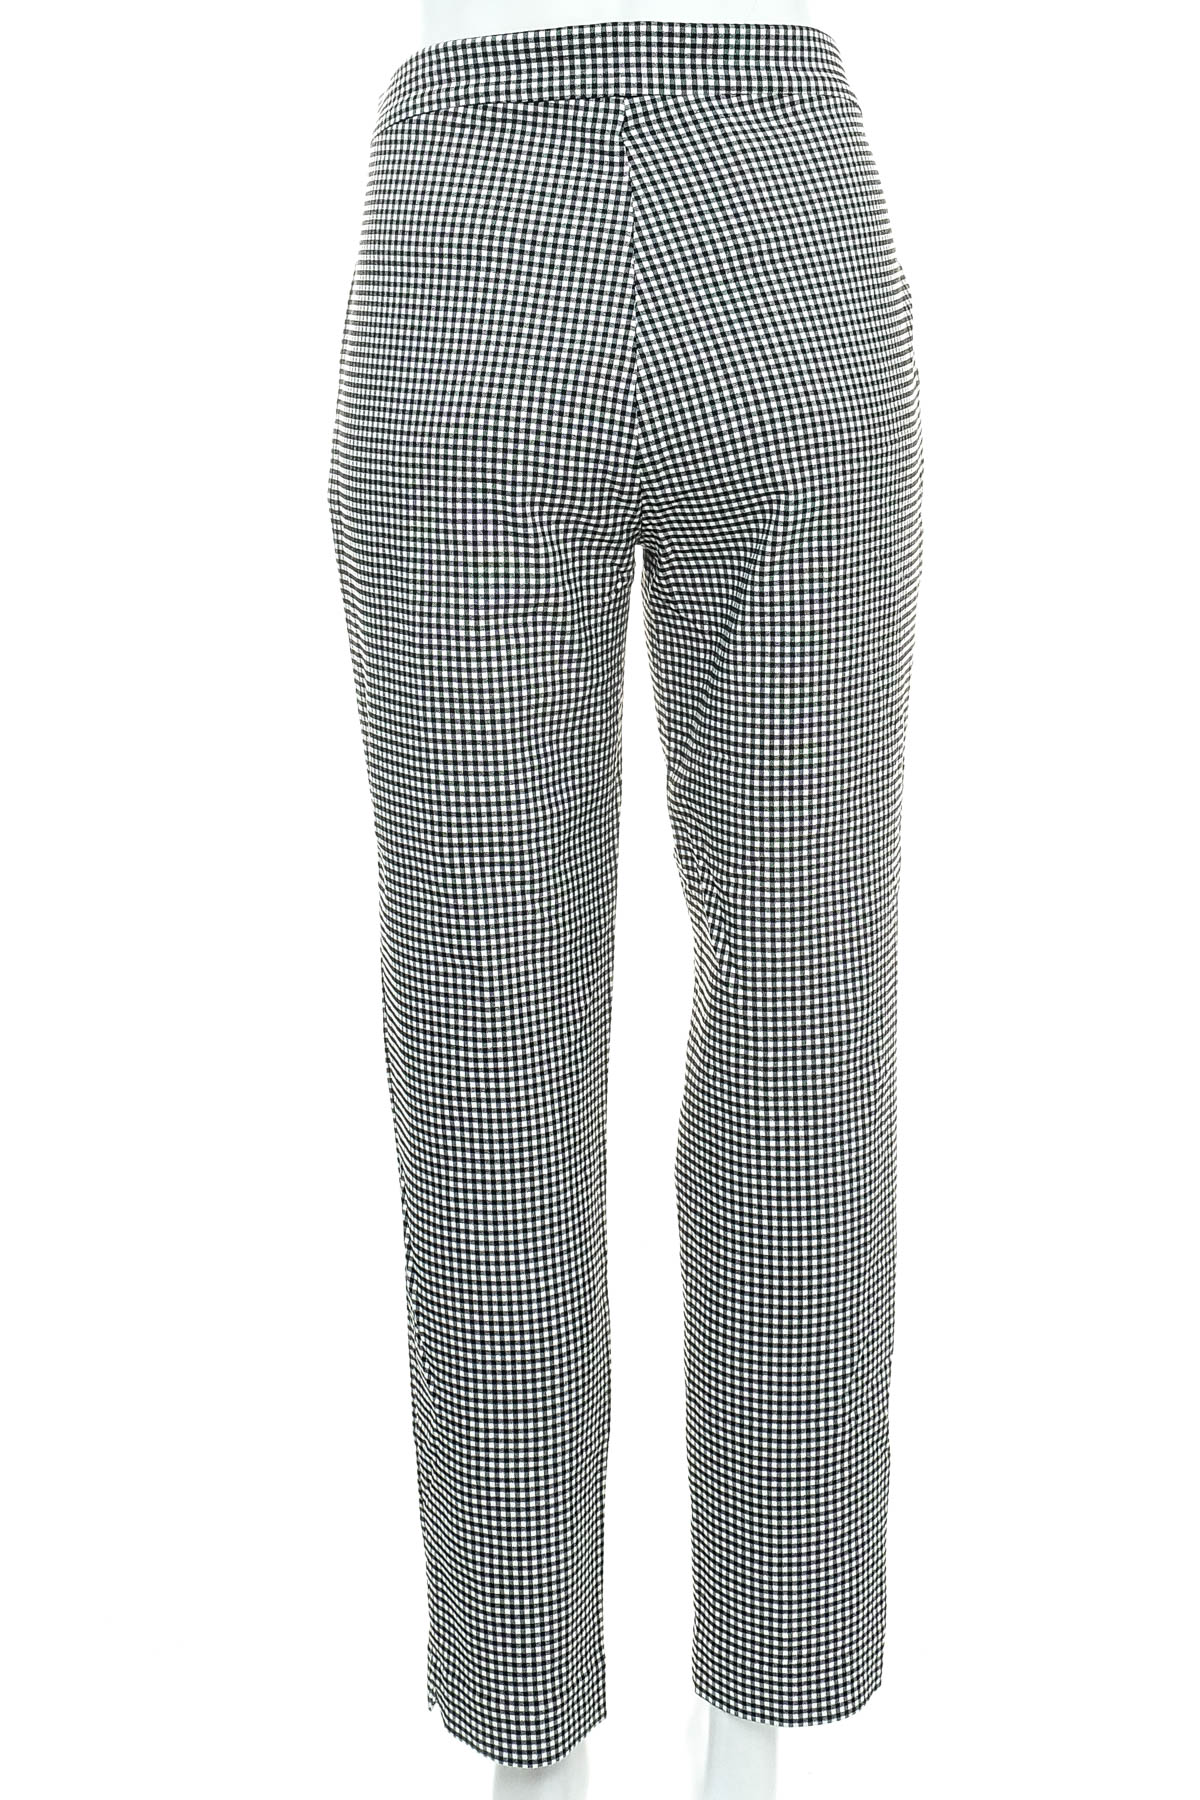 Women's trousers - PREVIEW - 1